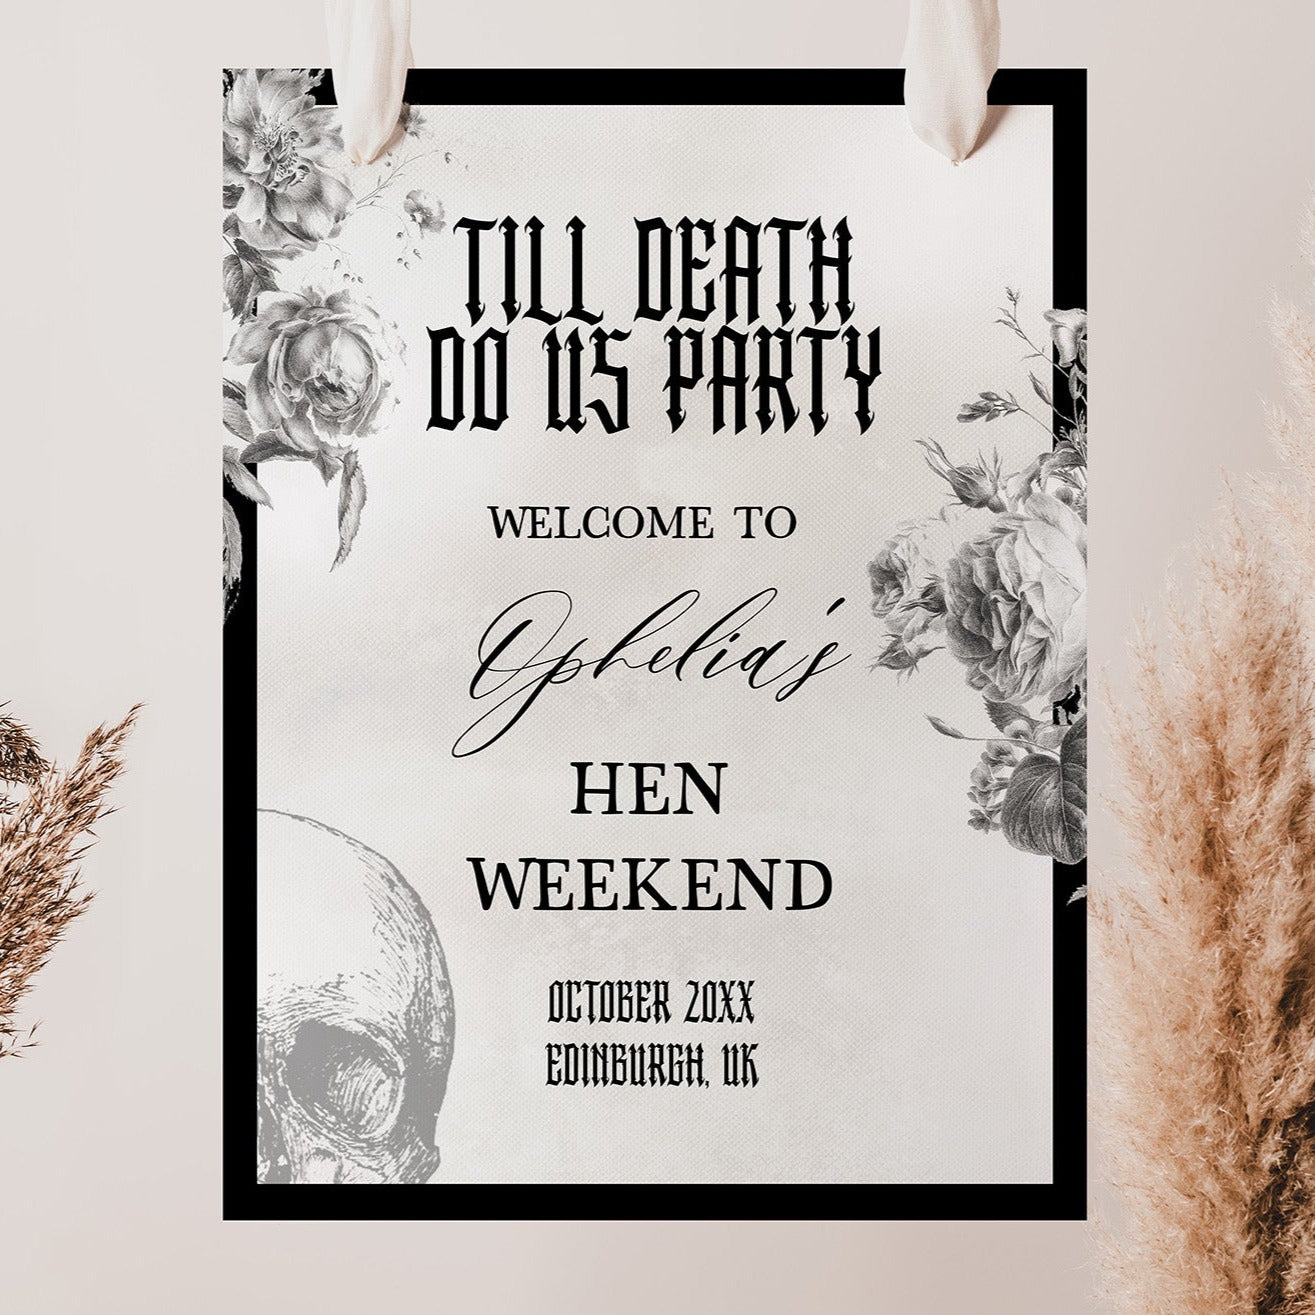 Fully editable and printable hen party weekend welcome sign with a gothic design. Perfect for a Bride or Die or Death Us To Party bridal shower themed party